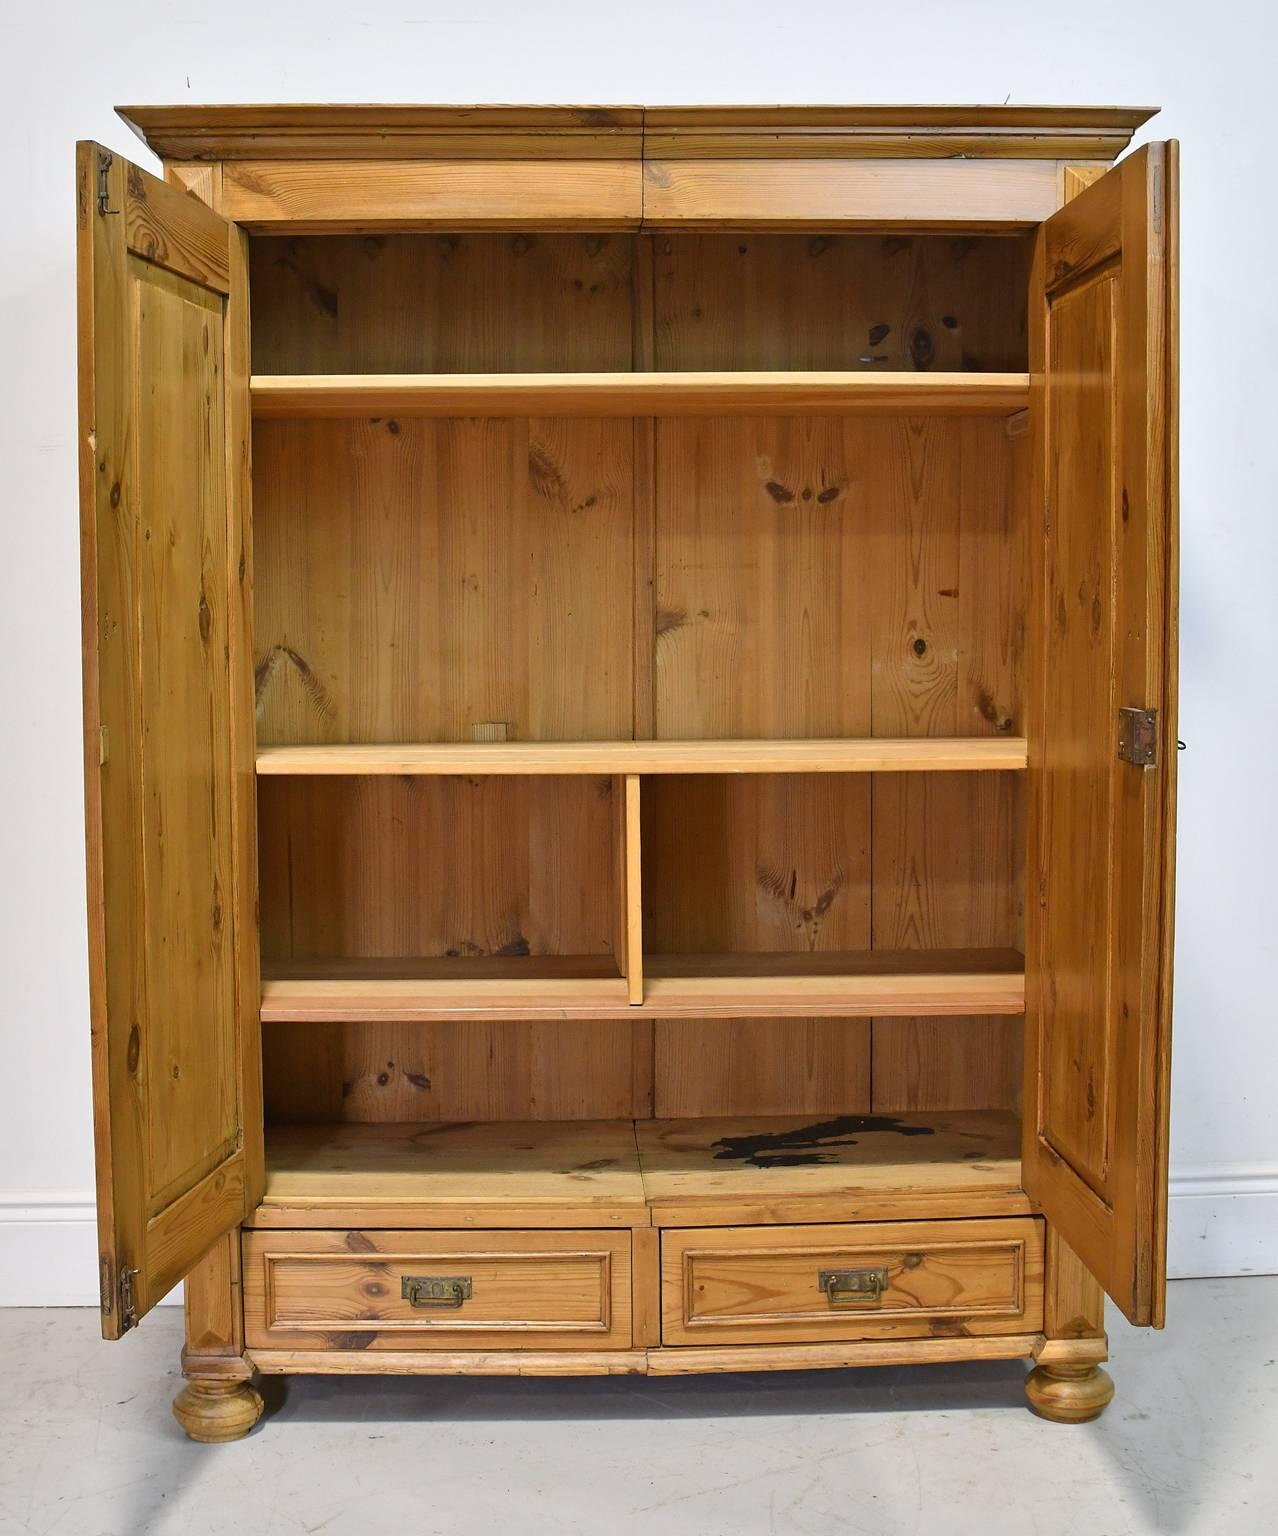 Country 19th Century Two-Door European Armoire in Pine with Two Drawers and Shelves